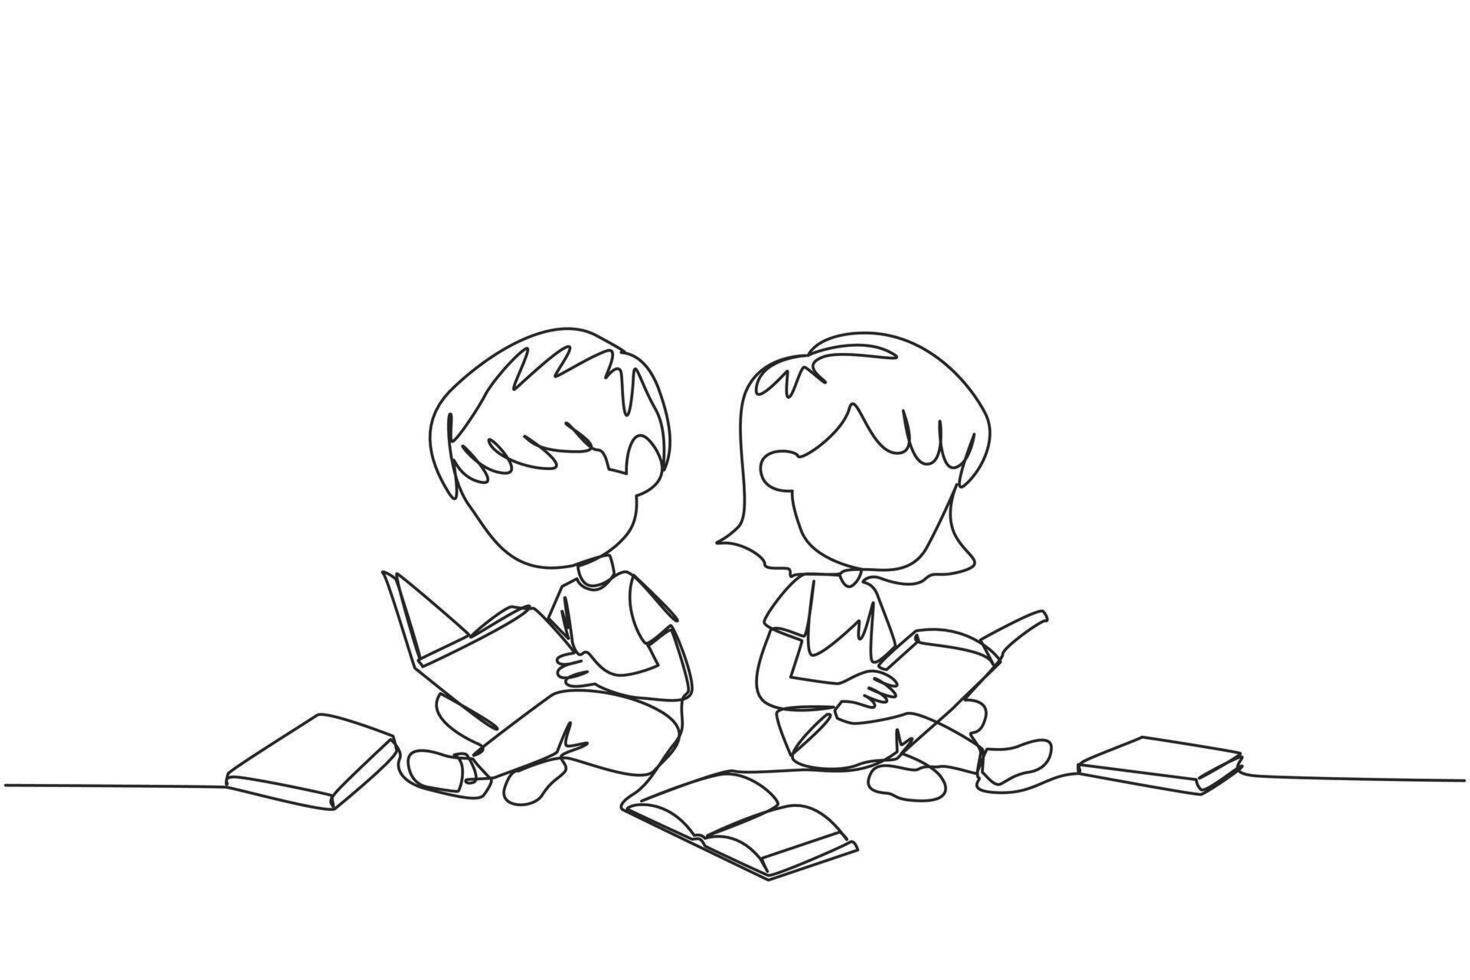 Single continuous line drawing kids sitting relaxed in a library reading a lot of books. Looking for answers to school assignments. Reading hobby. Book festival. One line design vector illustration